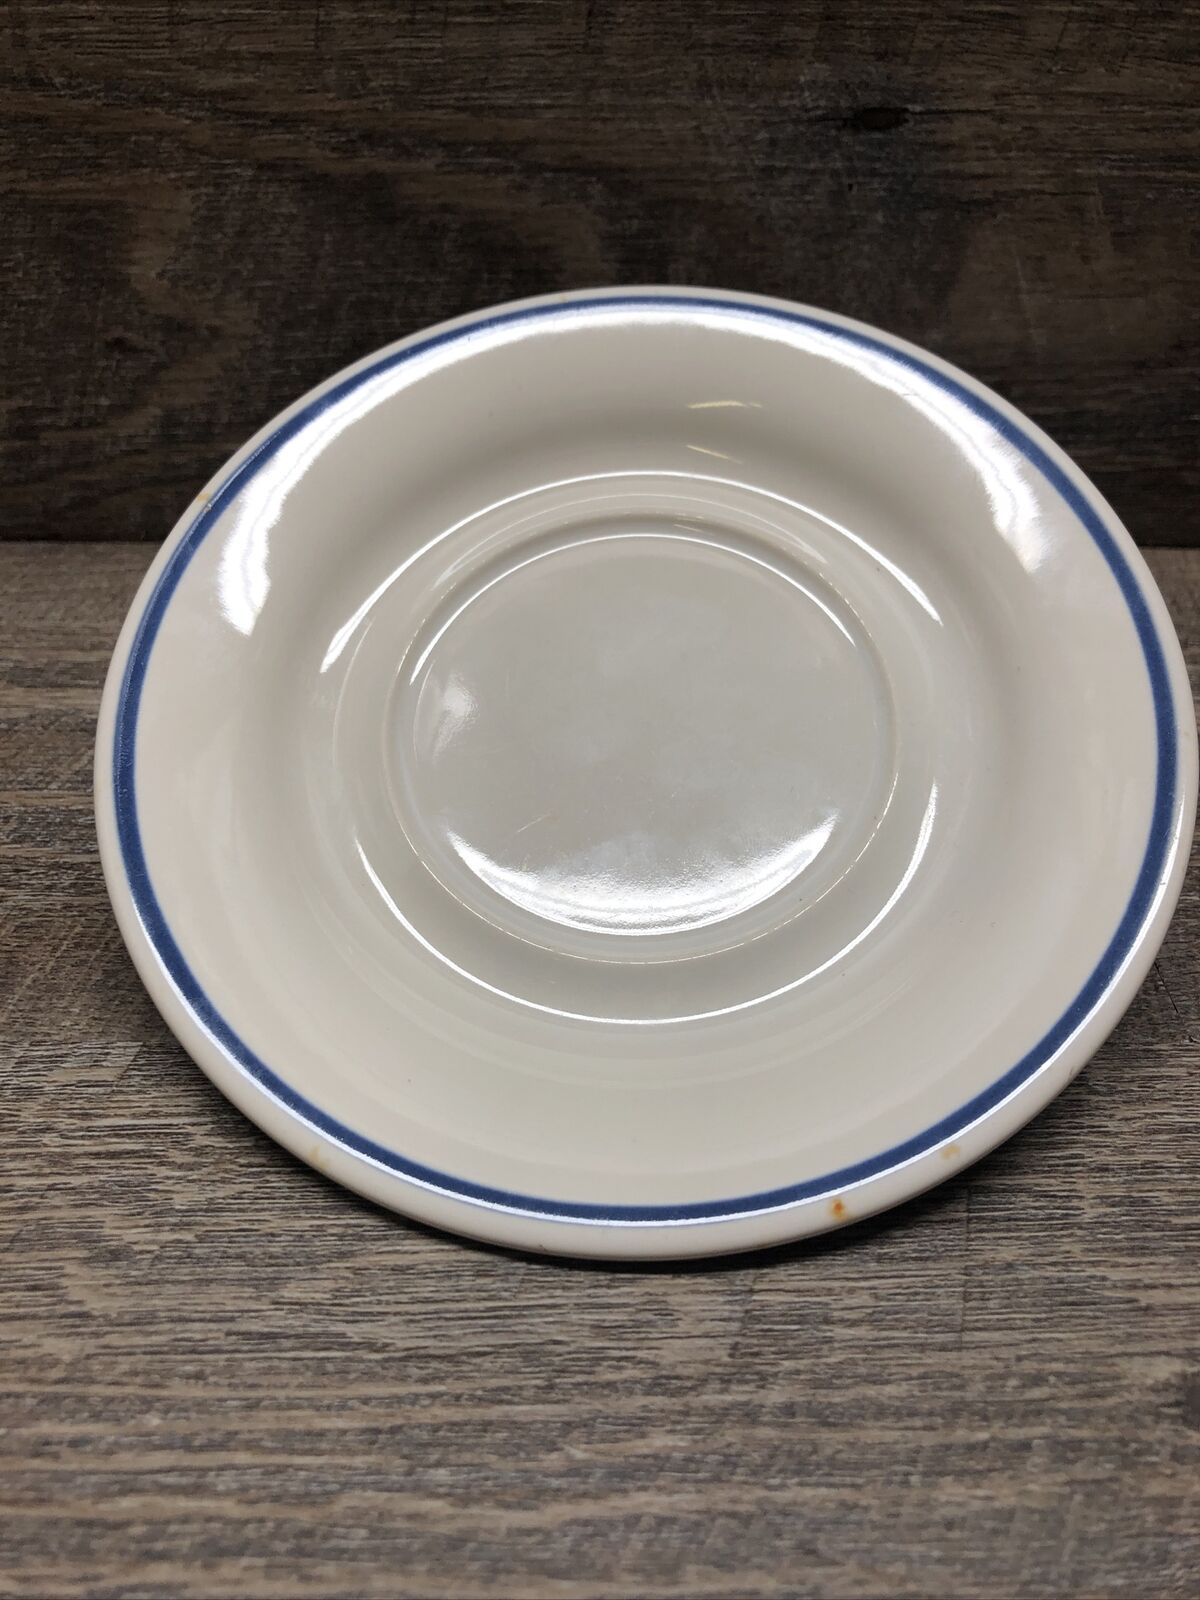 Pfaltzgraff Blue Band 6 Inch Saucer Plate No Chips